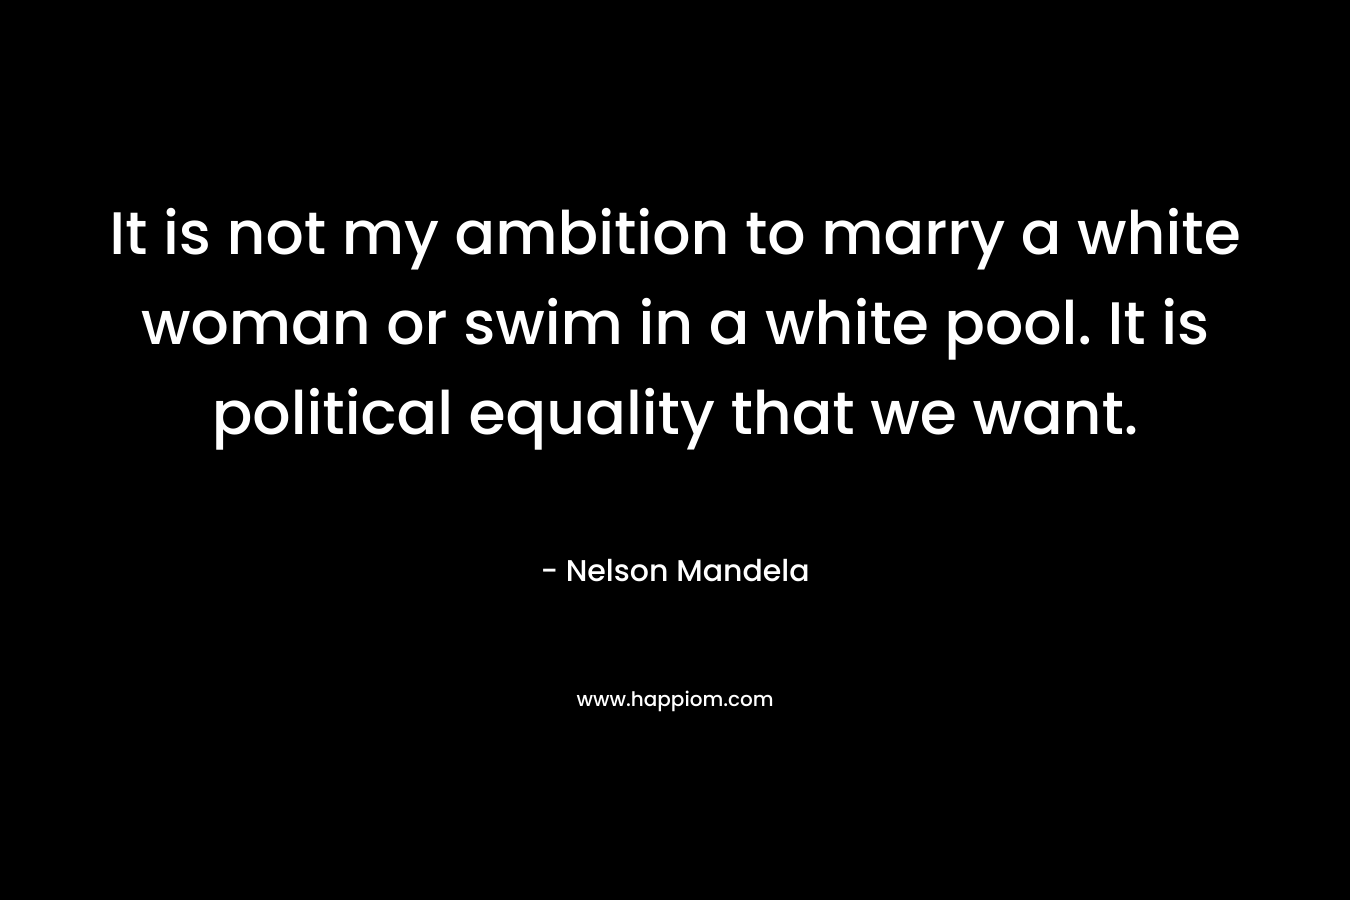 It is not my ambition to marry a white woman or swim in a white pool. It is political equality that we want. – Nelson Mandela